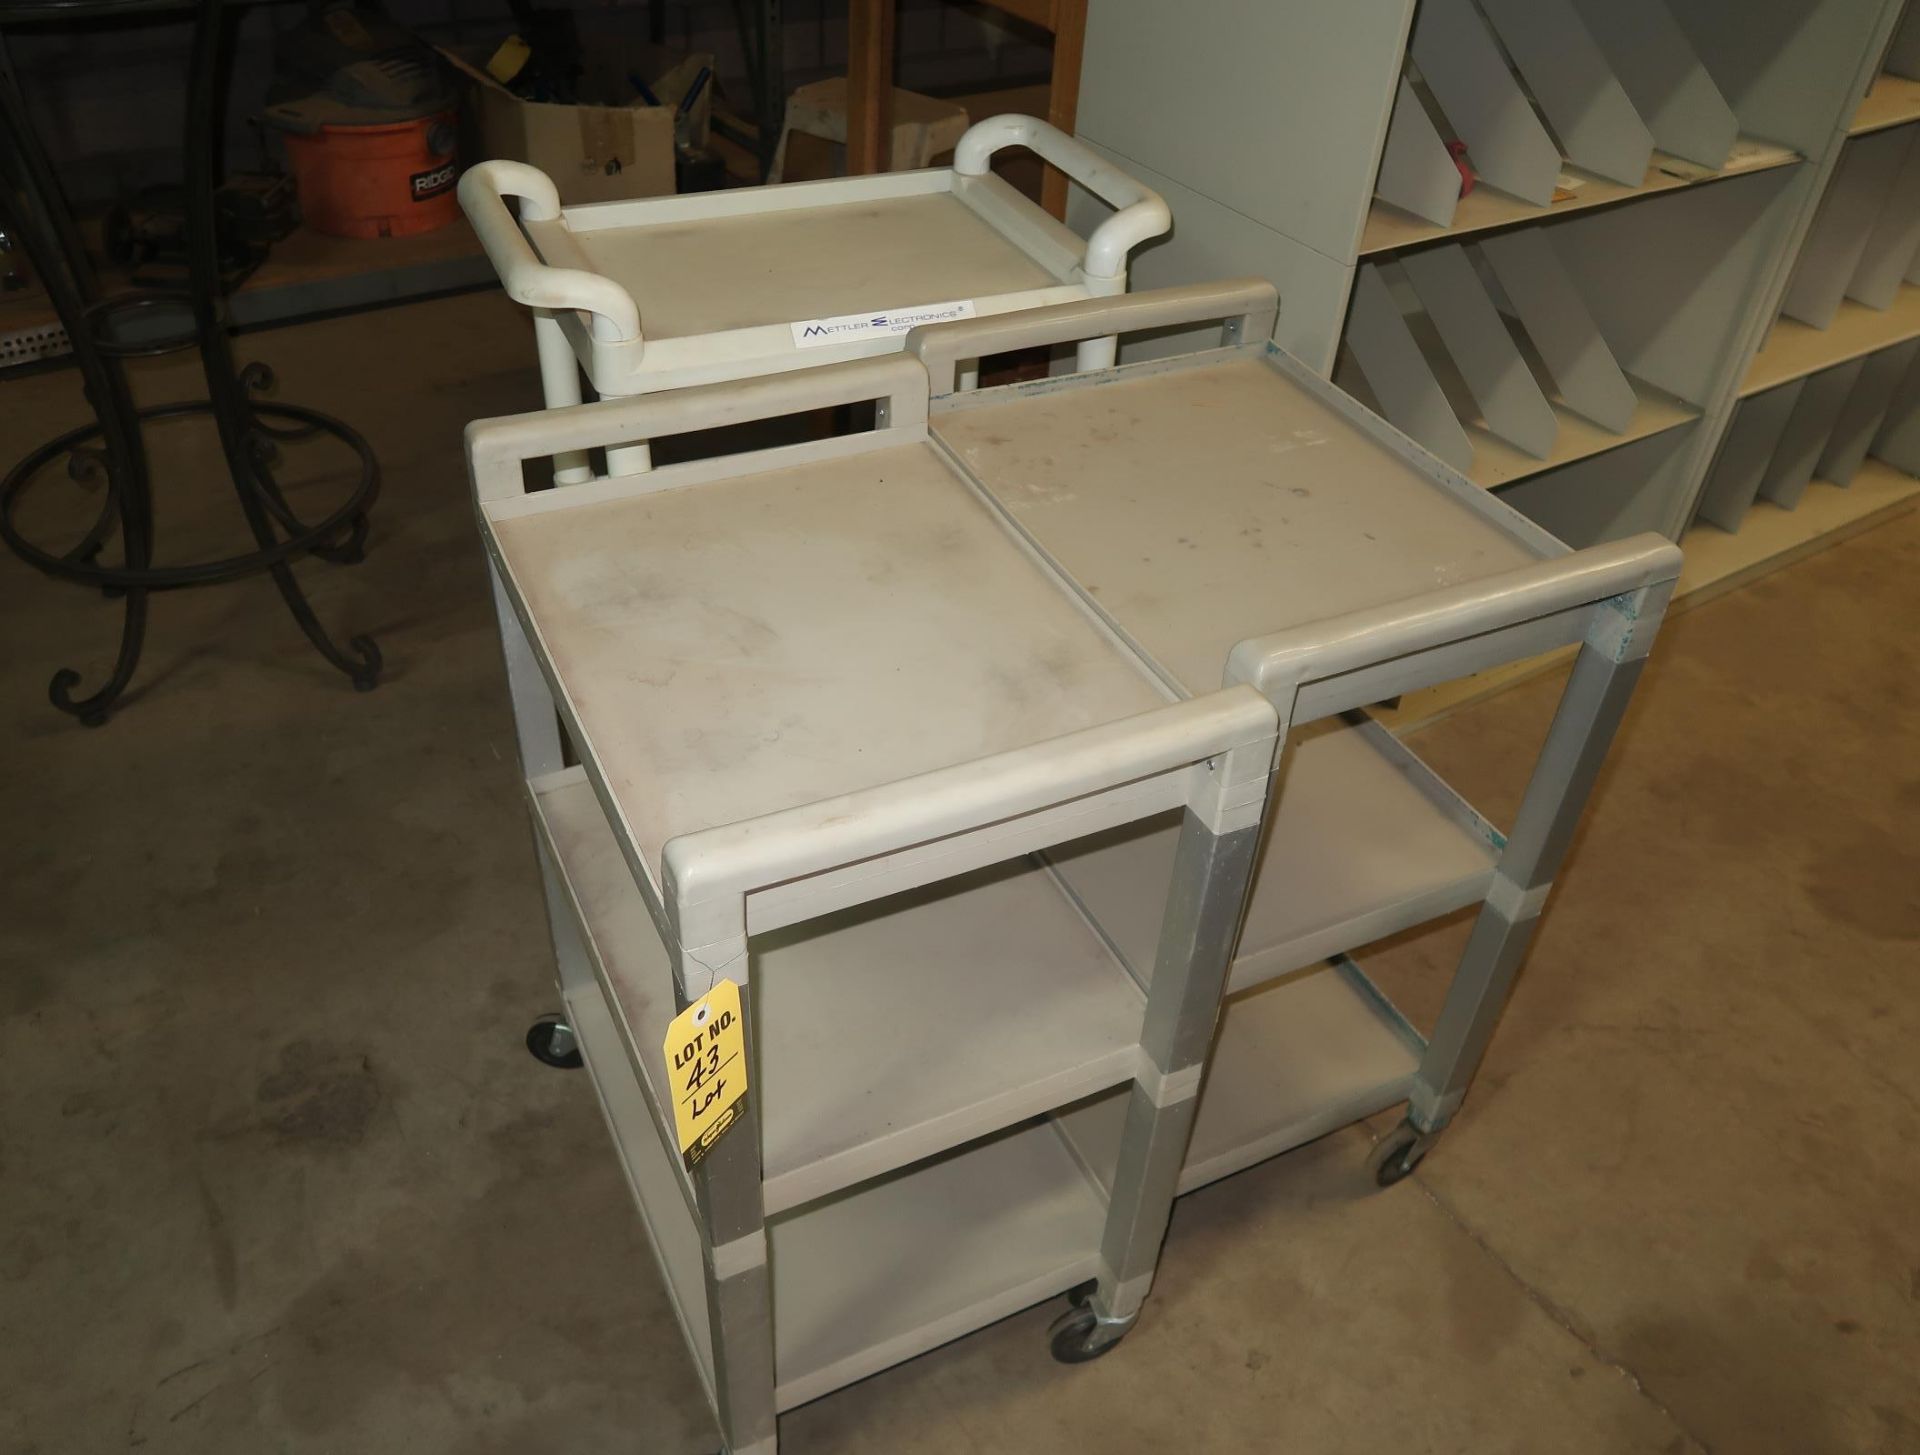 LOT OF OFFICE CARTS W/ CASTERS